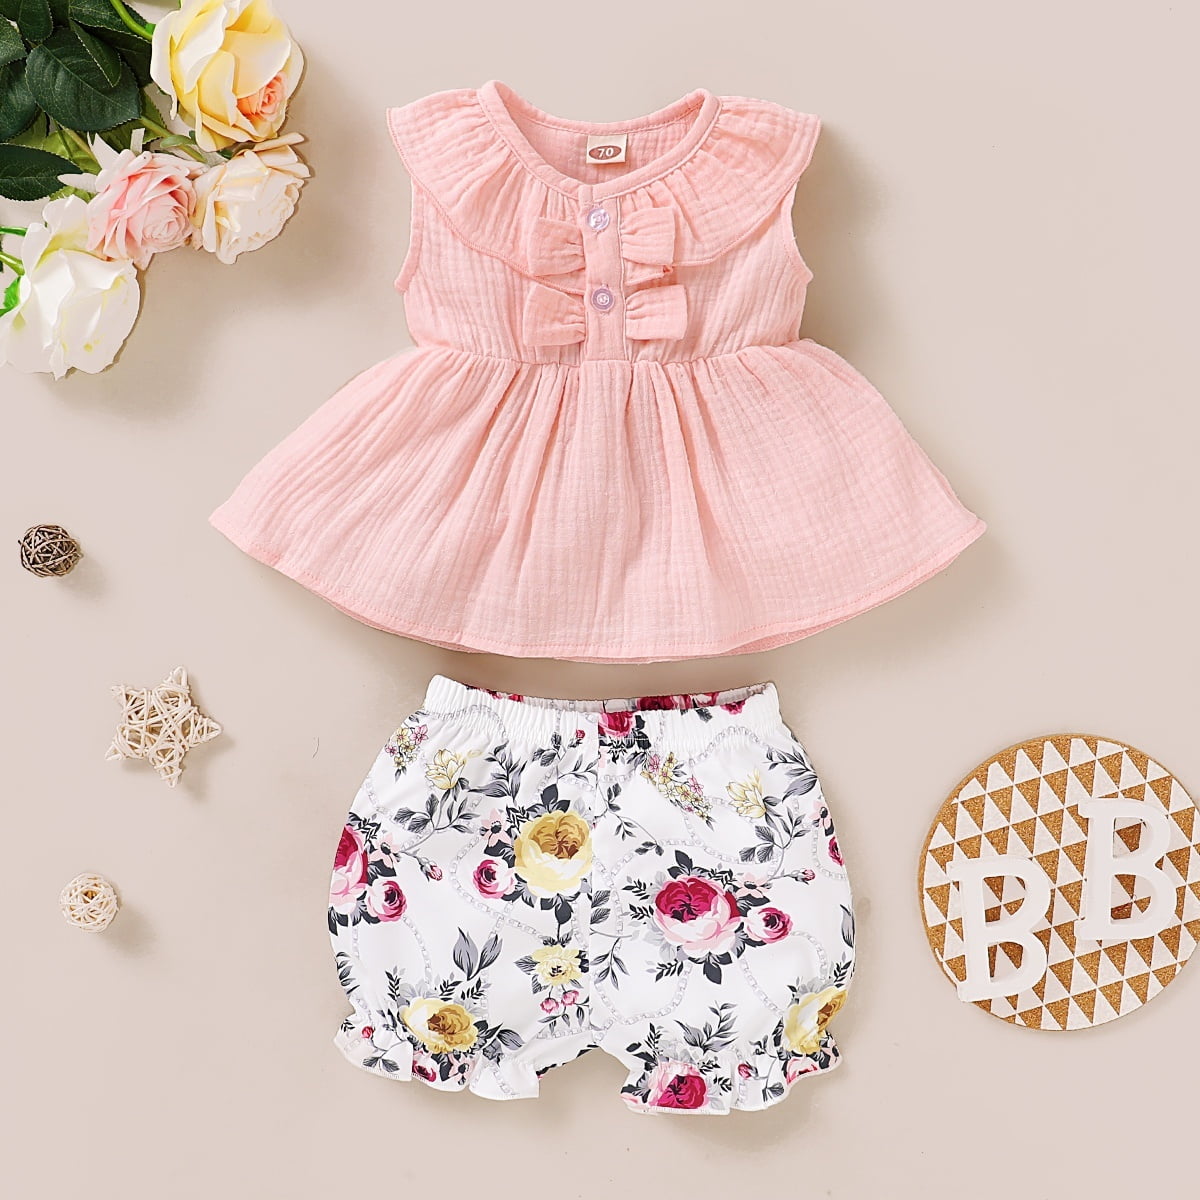 cute floral outfits